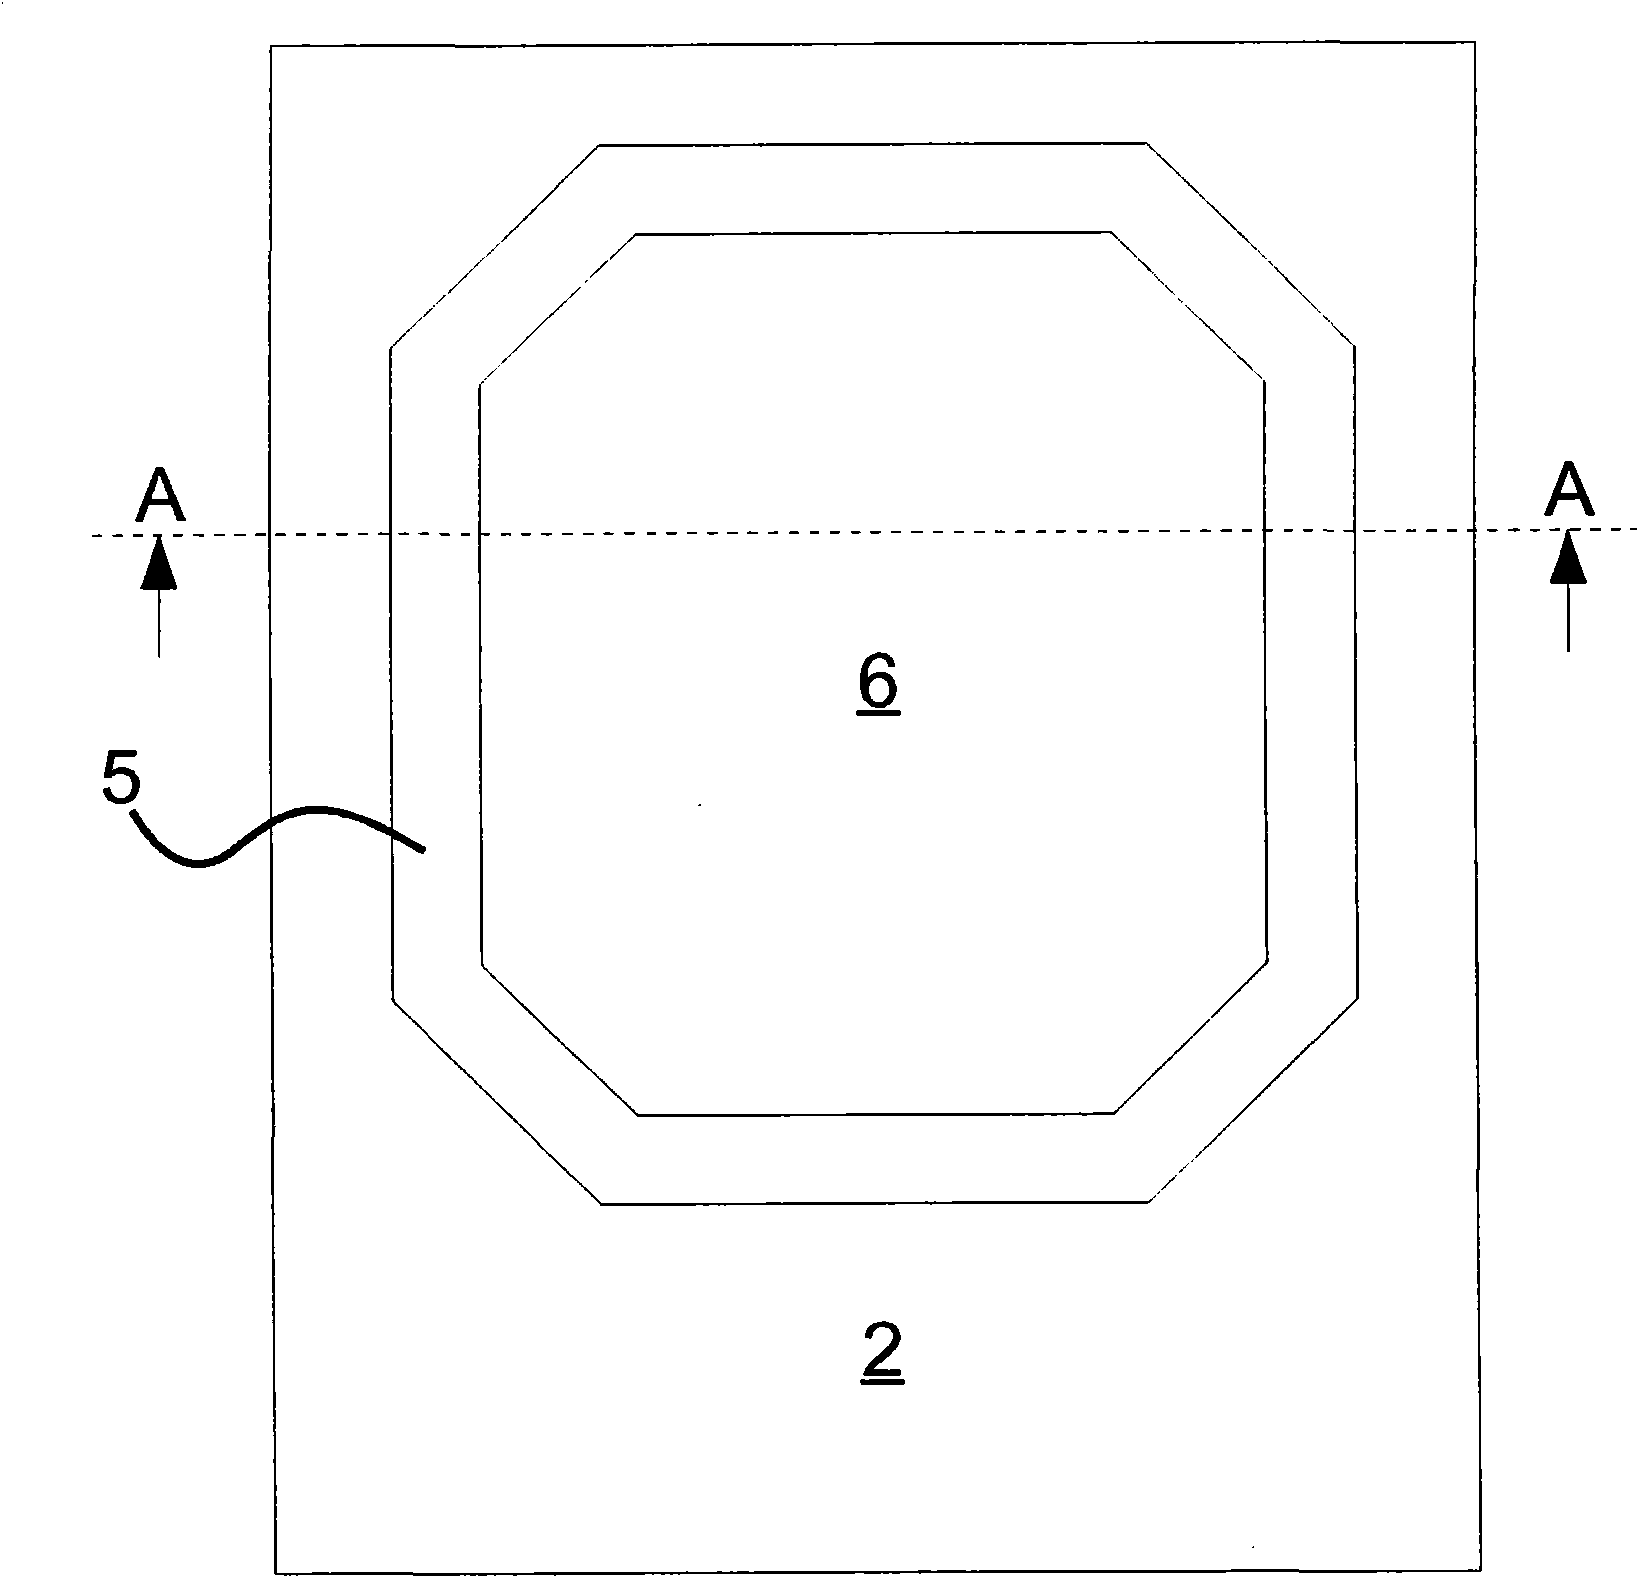 Mold and method for foaming a cooling device